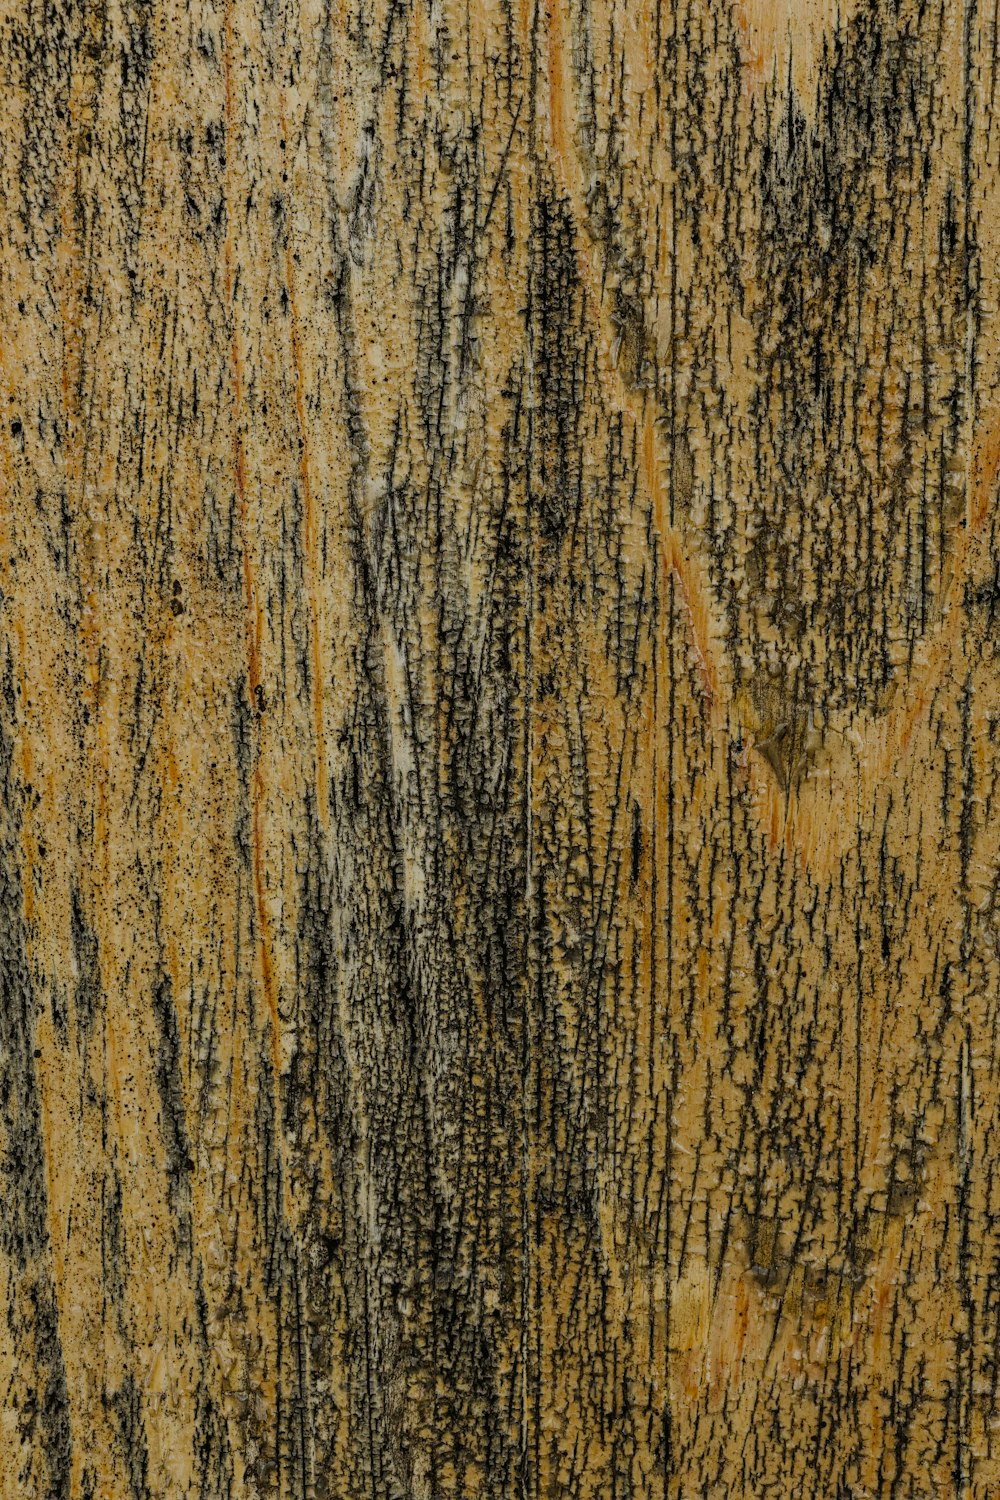 a close up of a wooden surface with black and yellow paint